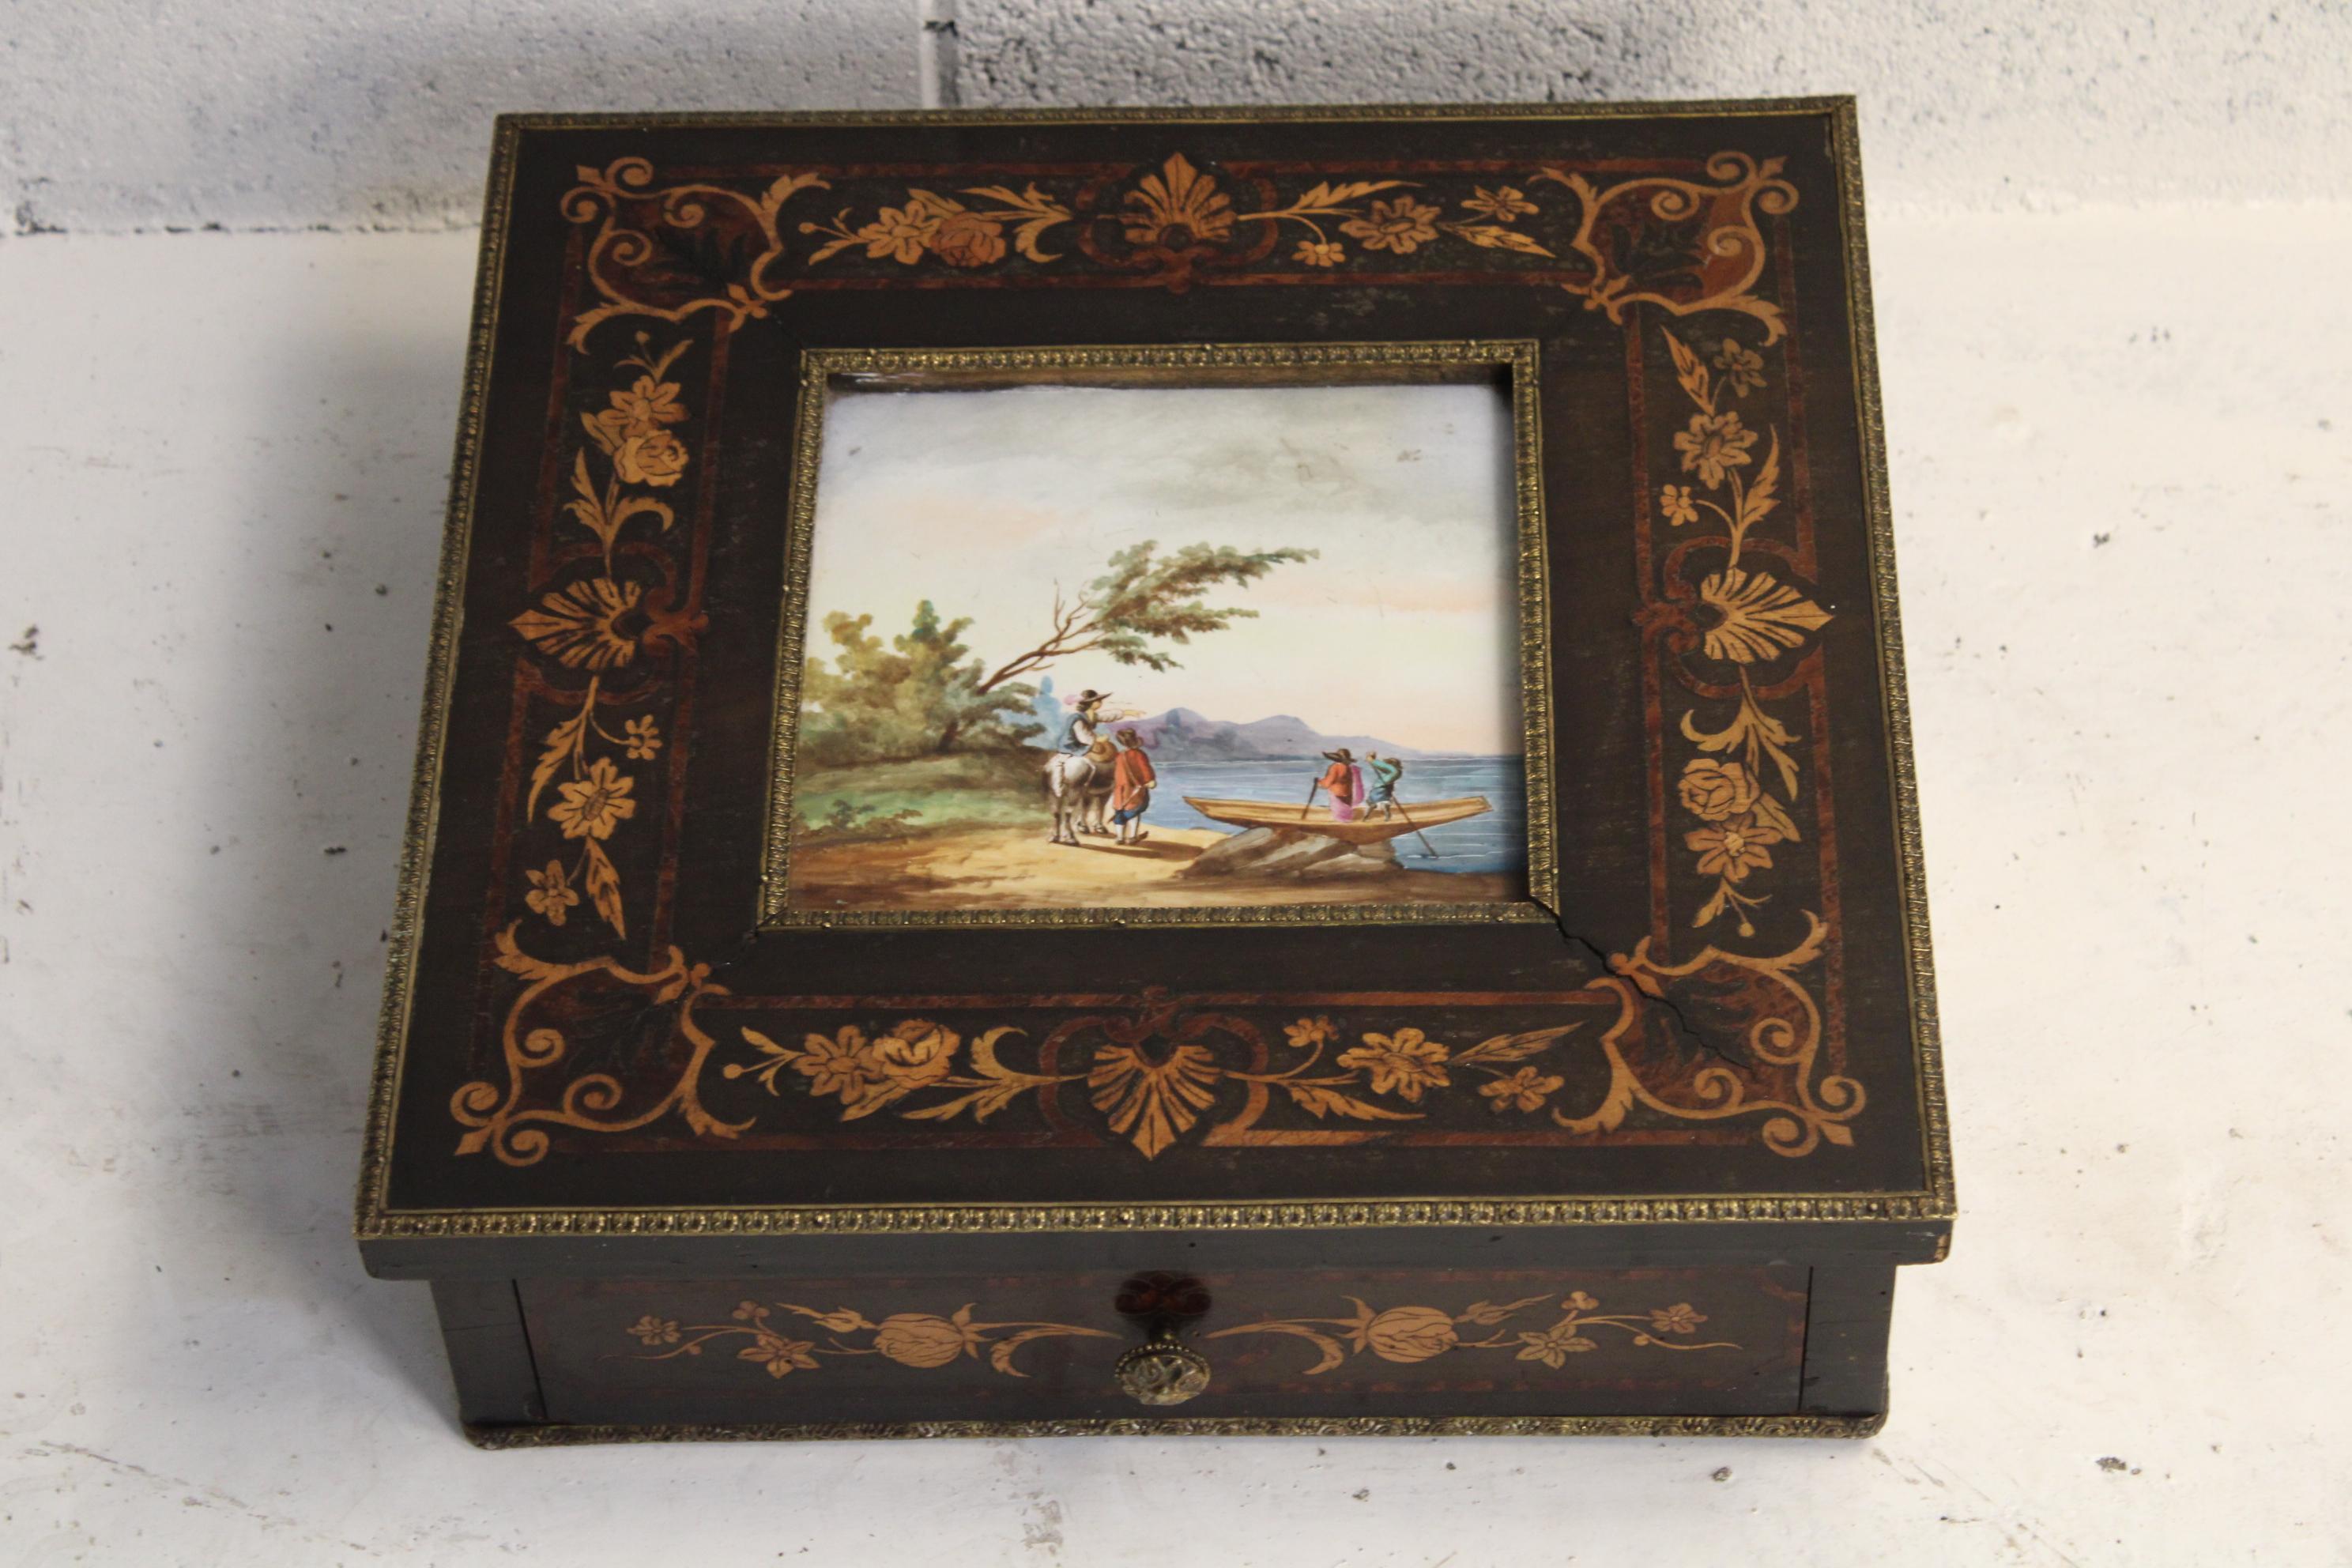 A french 19th century marquetry and painted on sevres jewelery box circa 1830s France
magnificent piece of art 
has been stand in exhibition of parma / Italy in 2021. in big remarkable dimension